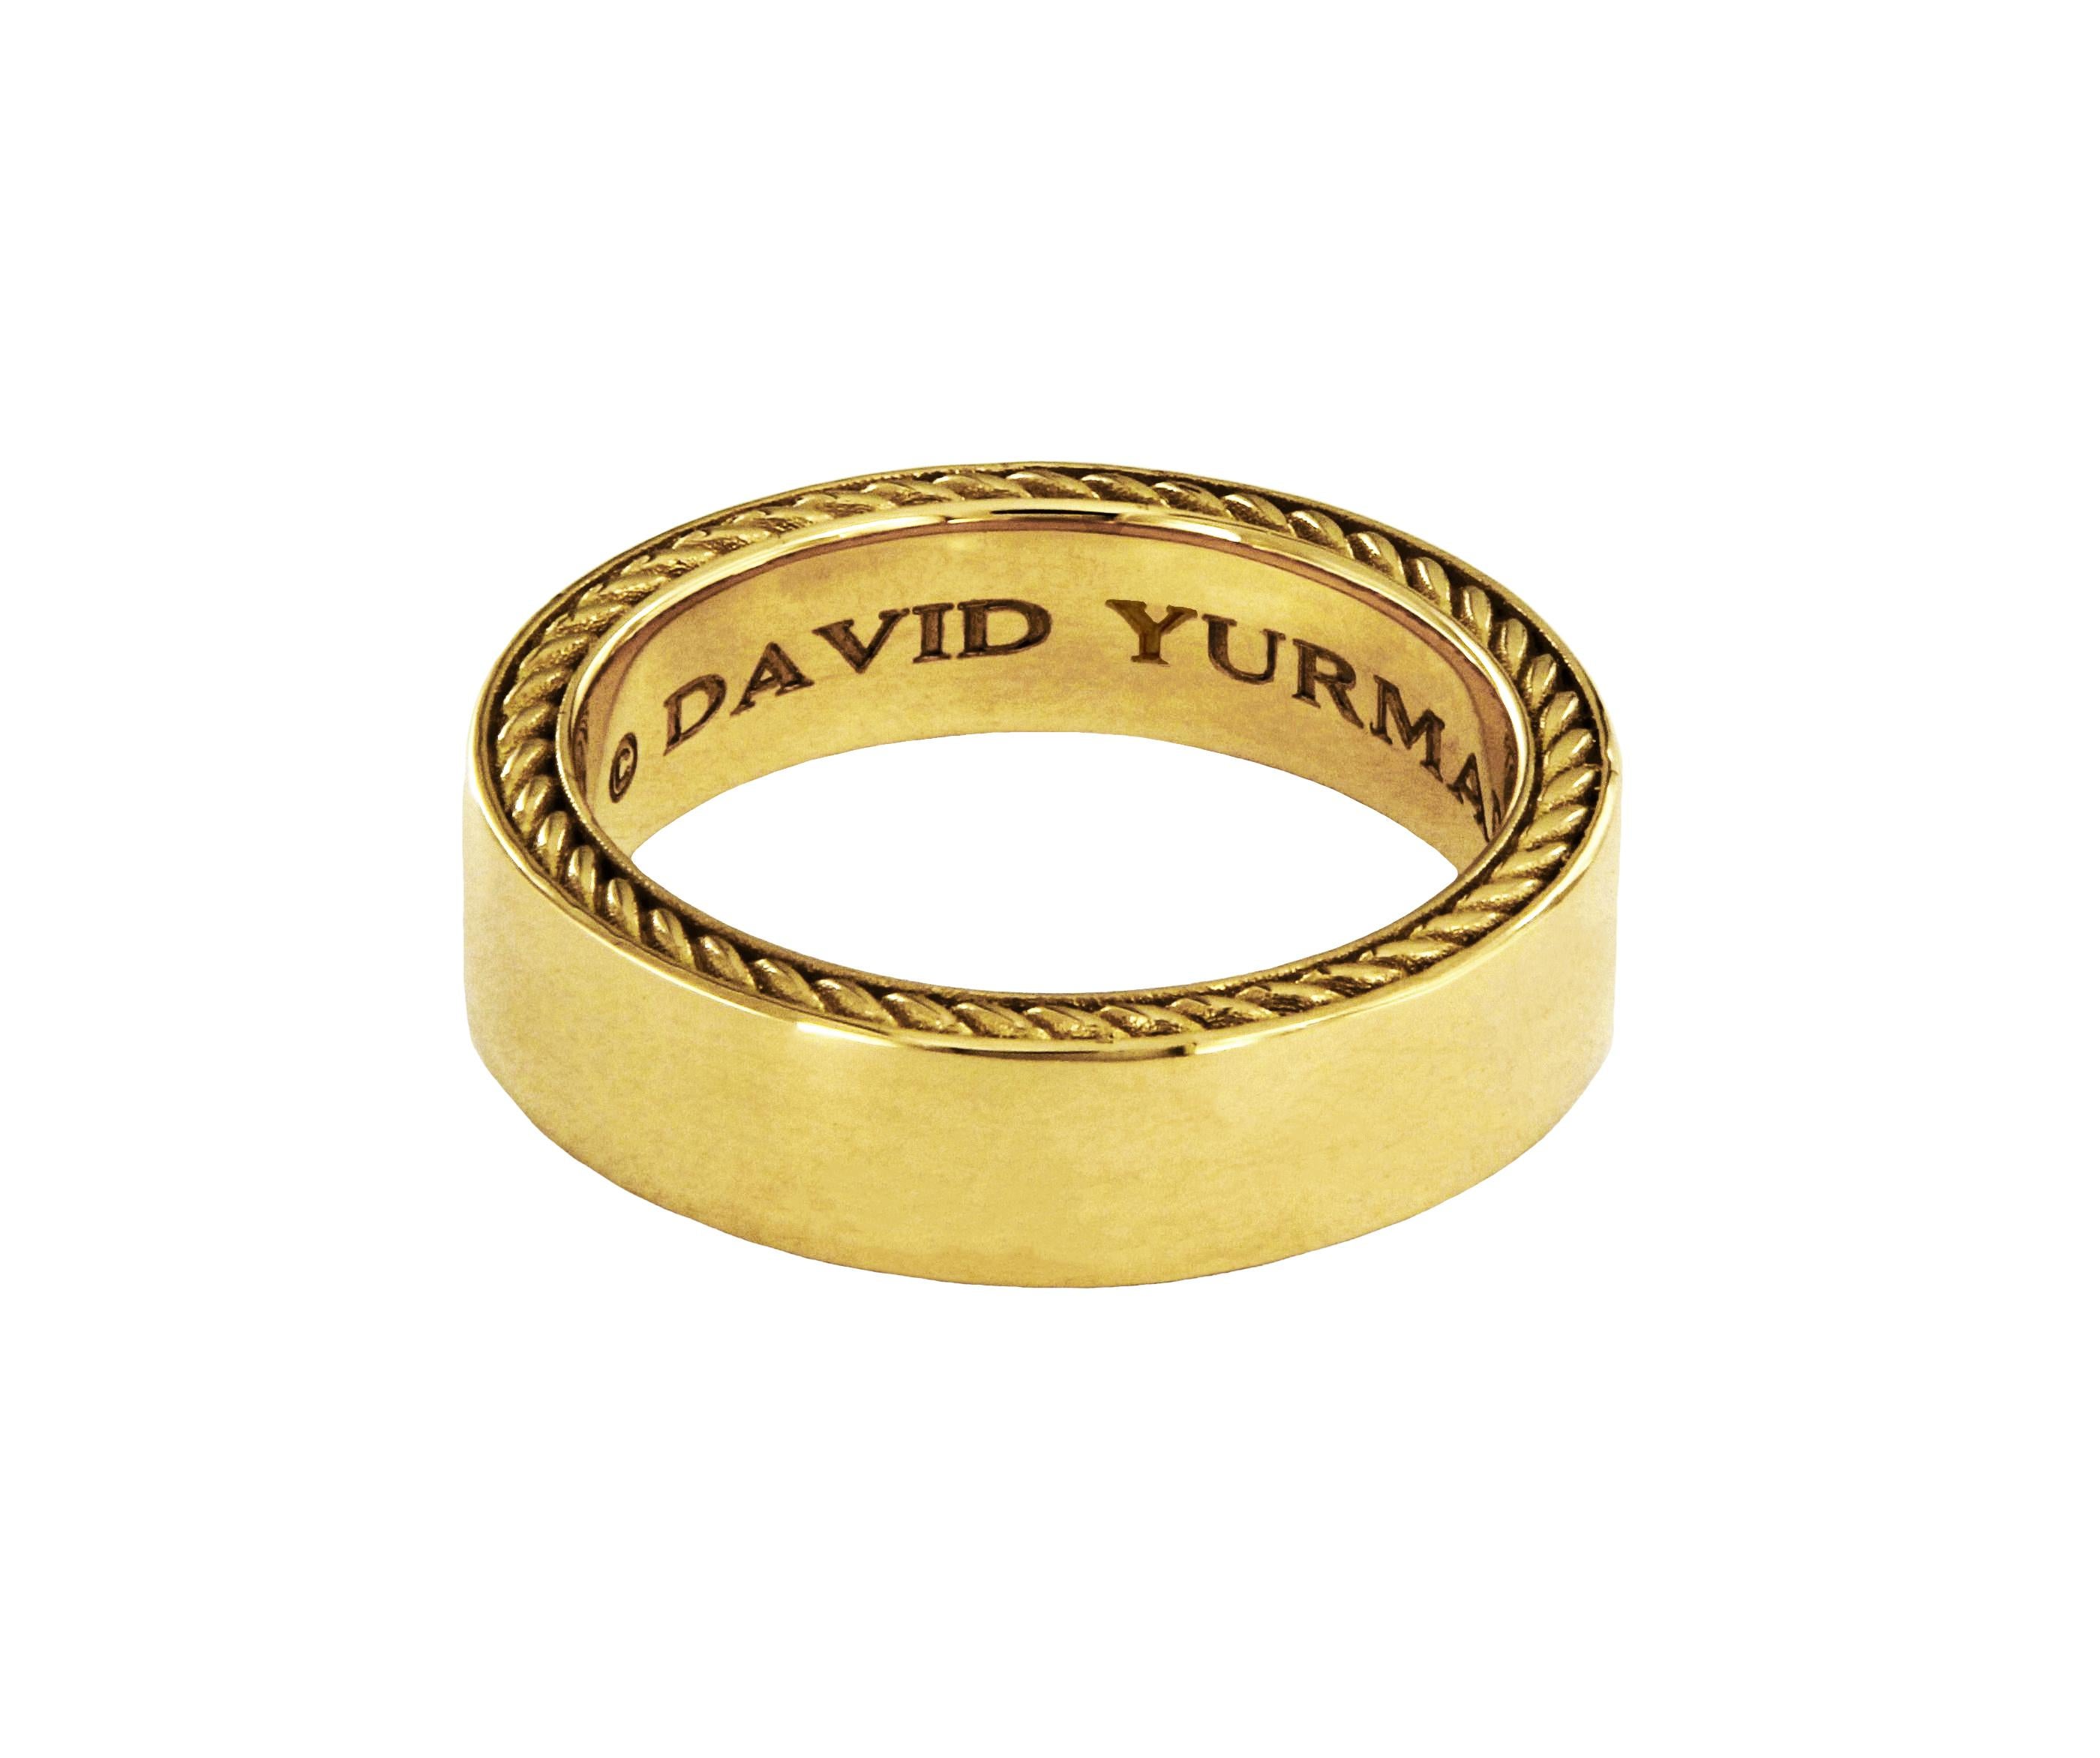 Streamline Collection. Men's Band Ring.

18-karat Yellow Gold
Ring Size - 10
Ring Wide - 6mm
Ring weight: 16gr
*David Yurman box included.

